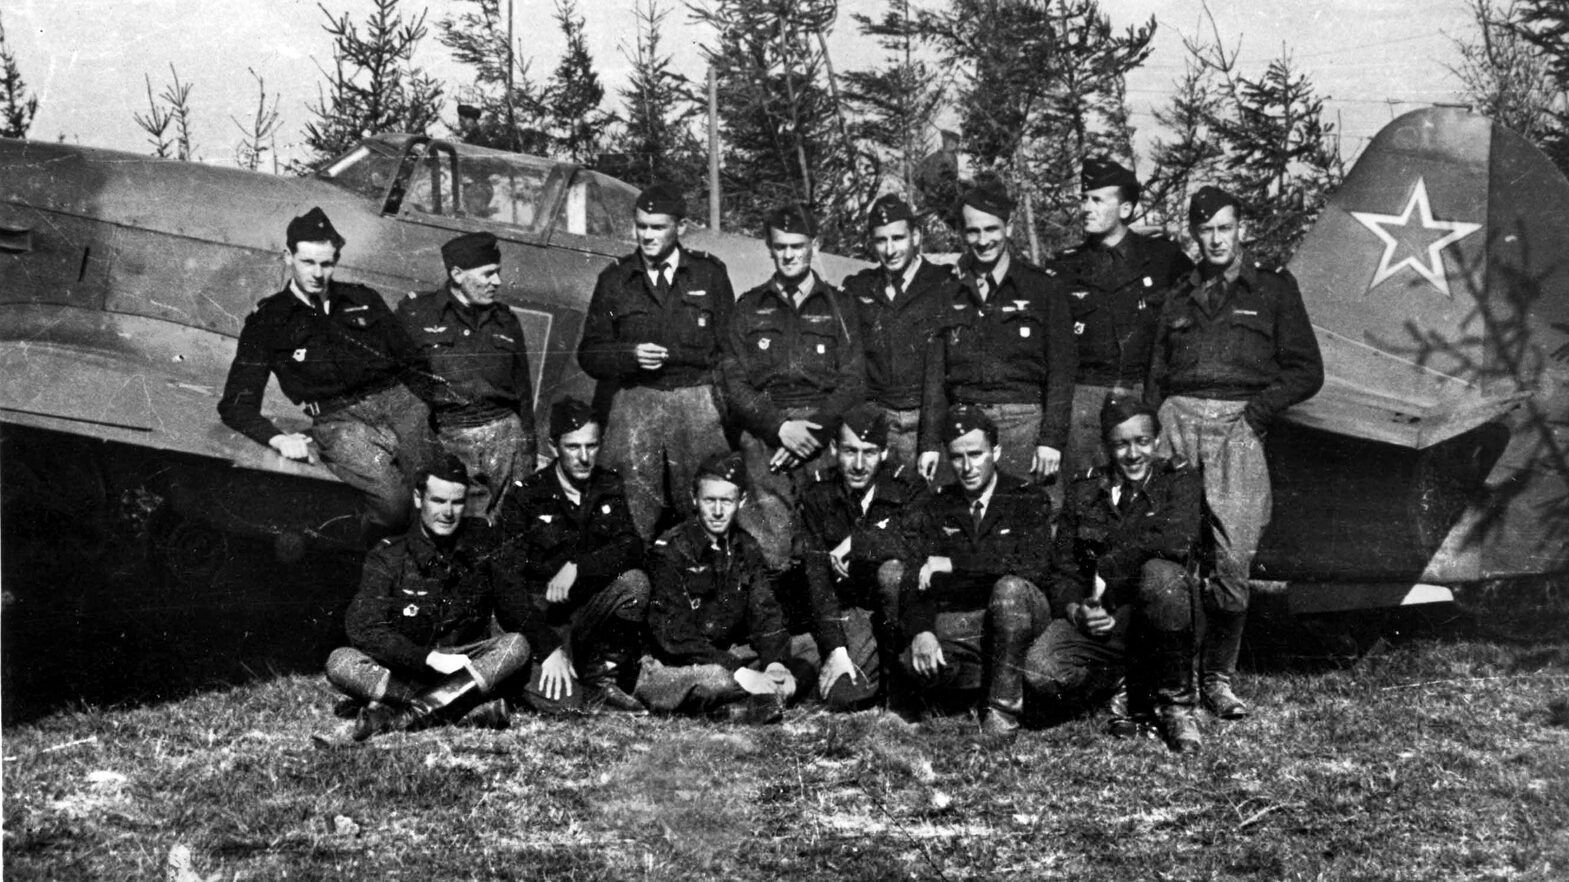 Roger Sauvage sits at far right in this photograph of Free French pilots belonging to the Normandie Niemen squadron. A Yak fighter plane serves as the backdrop for the image.